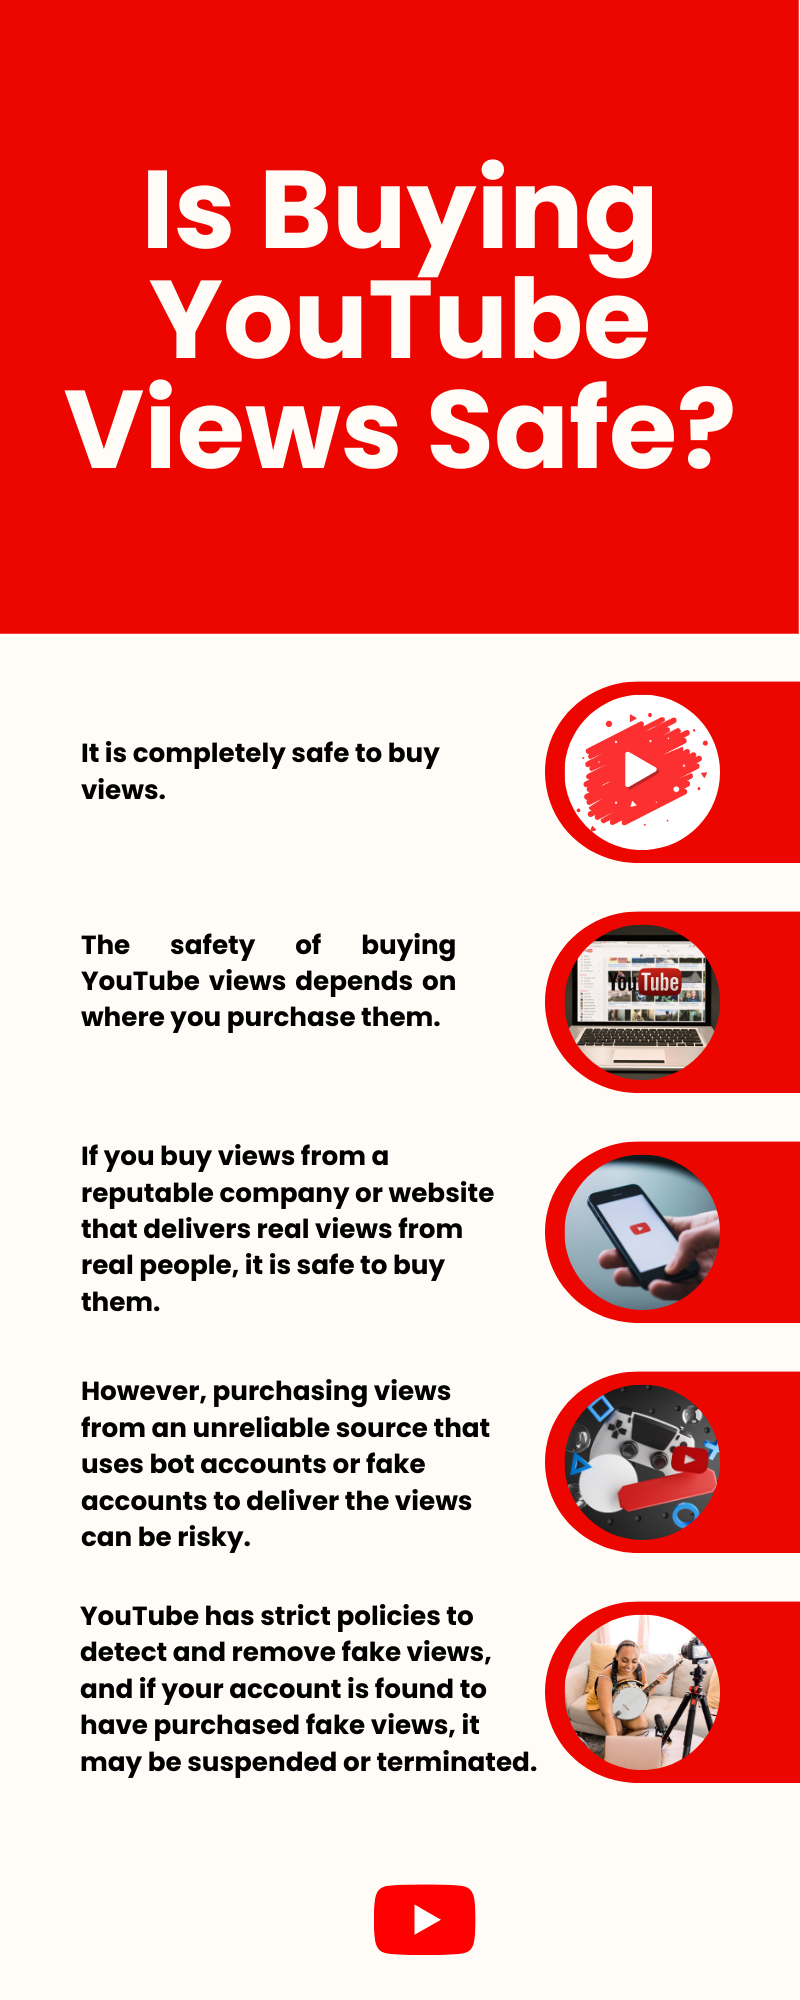 Is Buying YouTube Views Safe